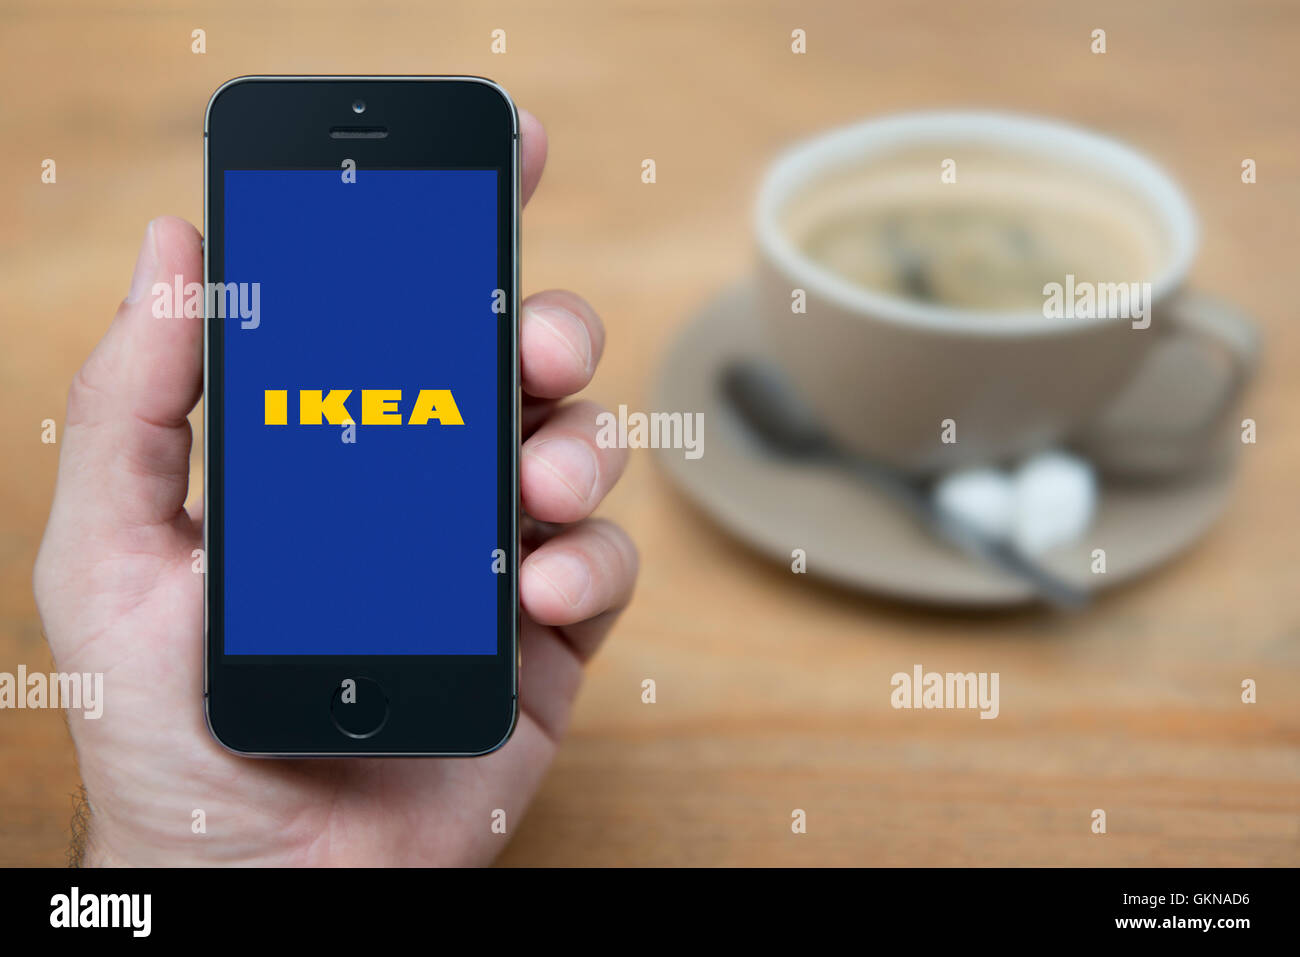 A man looks at his iPhone which displays the IKEA logo, while sat with a cup of coffee (Editorial use only). Stock Photo